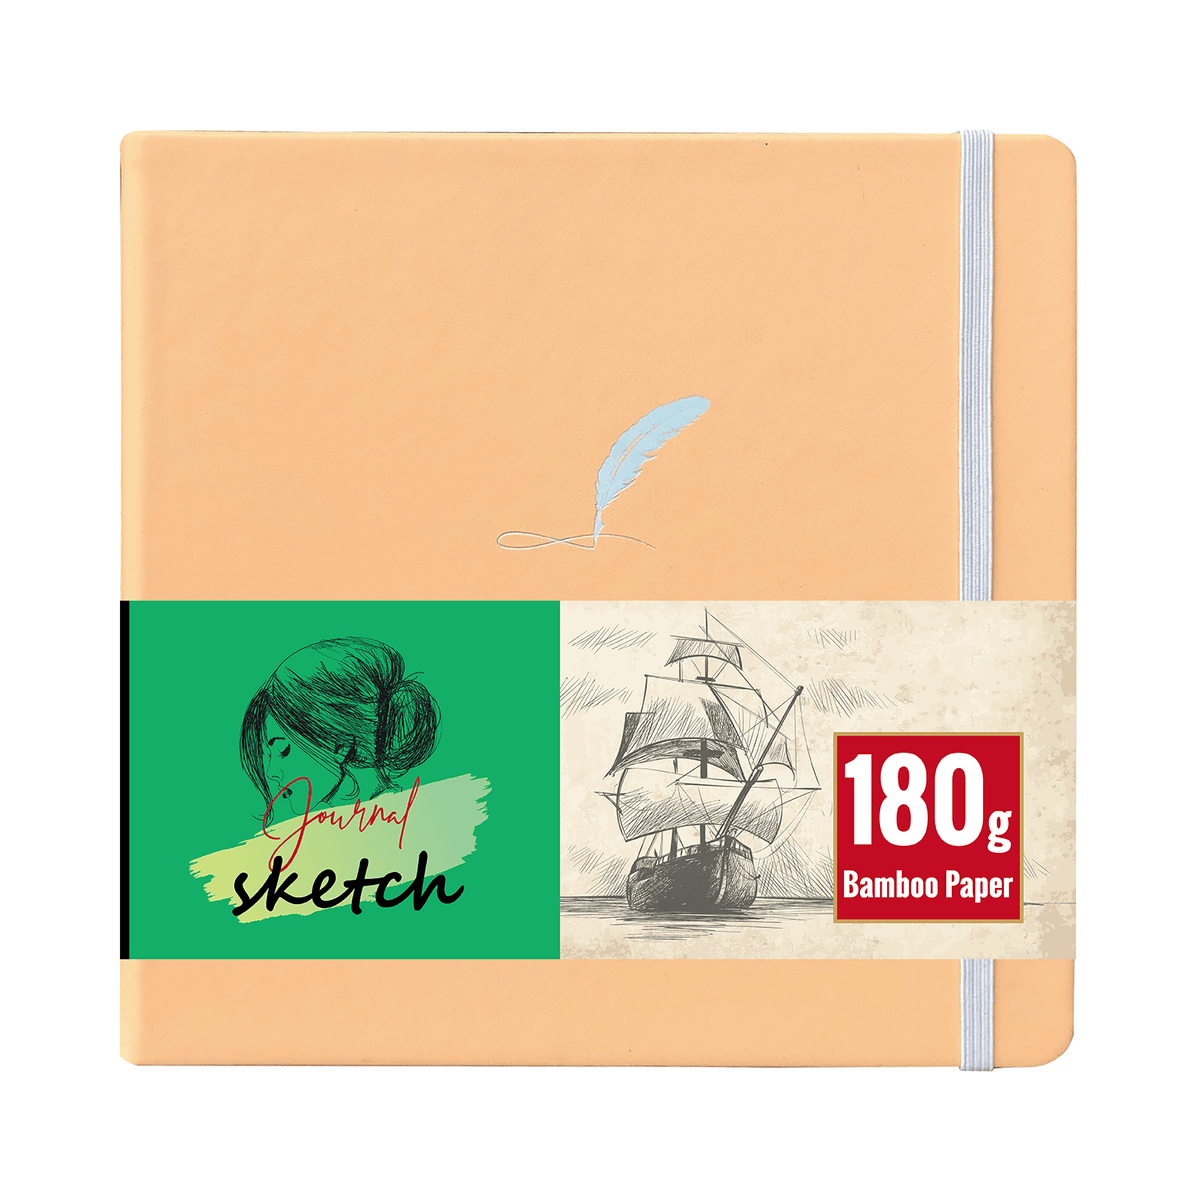 8X8 Square Hardcover SKetchbook Journal 180GSM Bamboo PAPER 128 Pages - White - bukenotebook